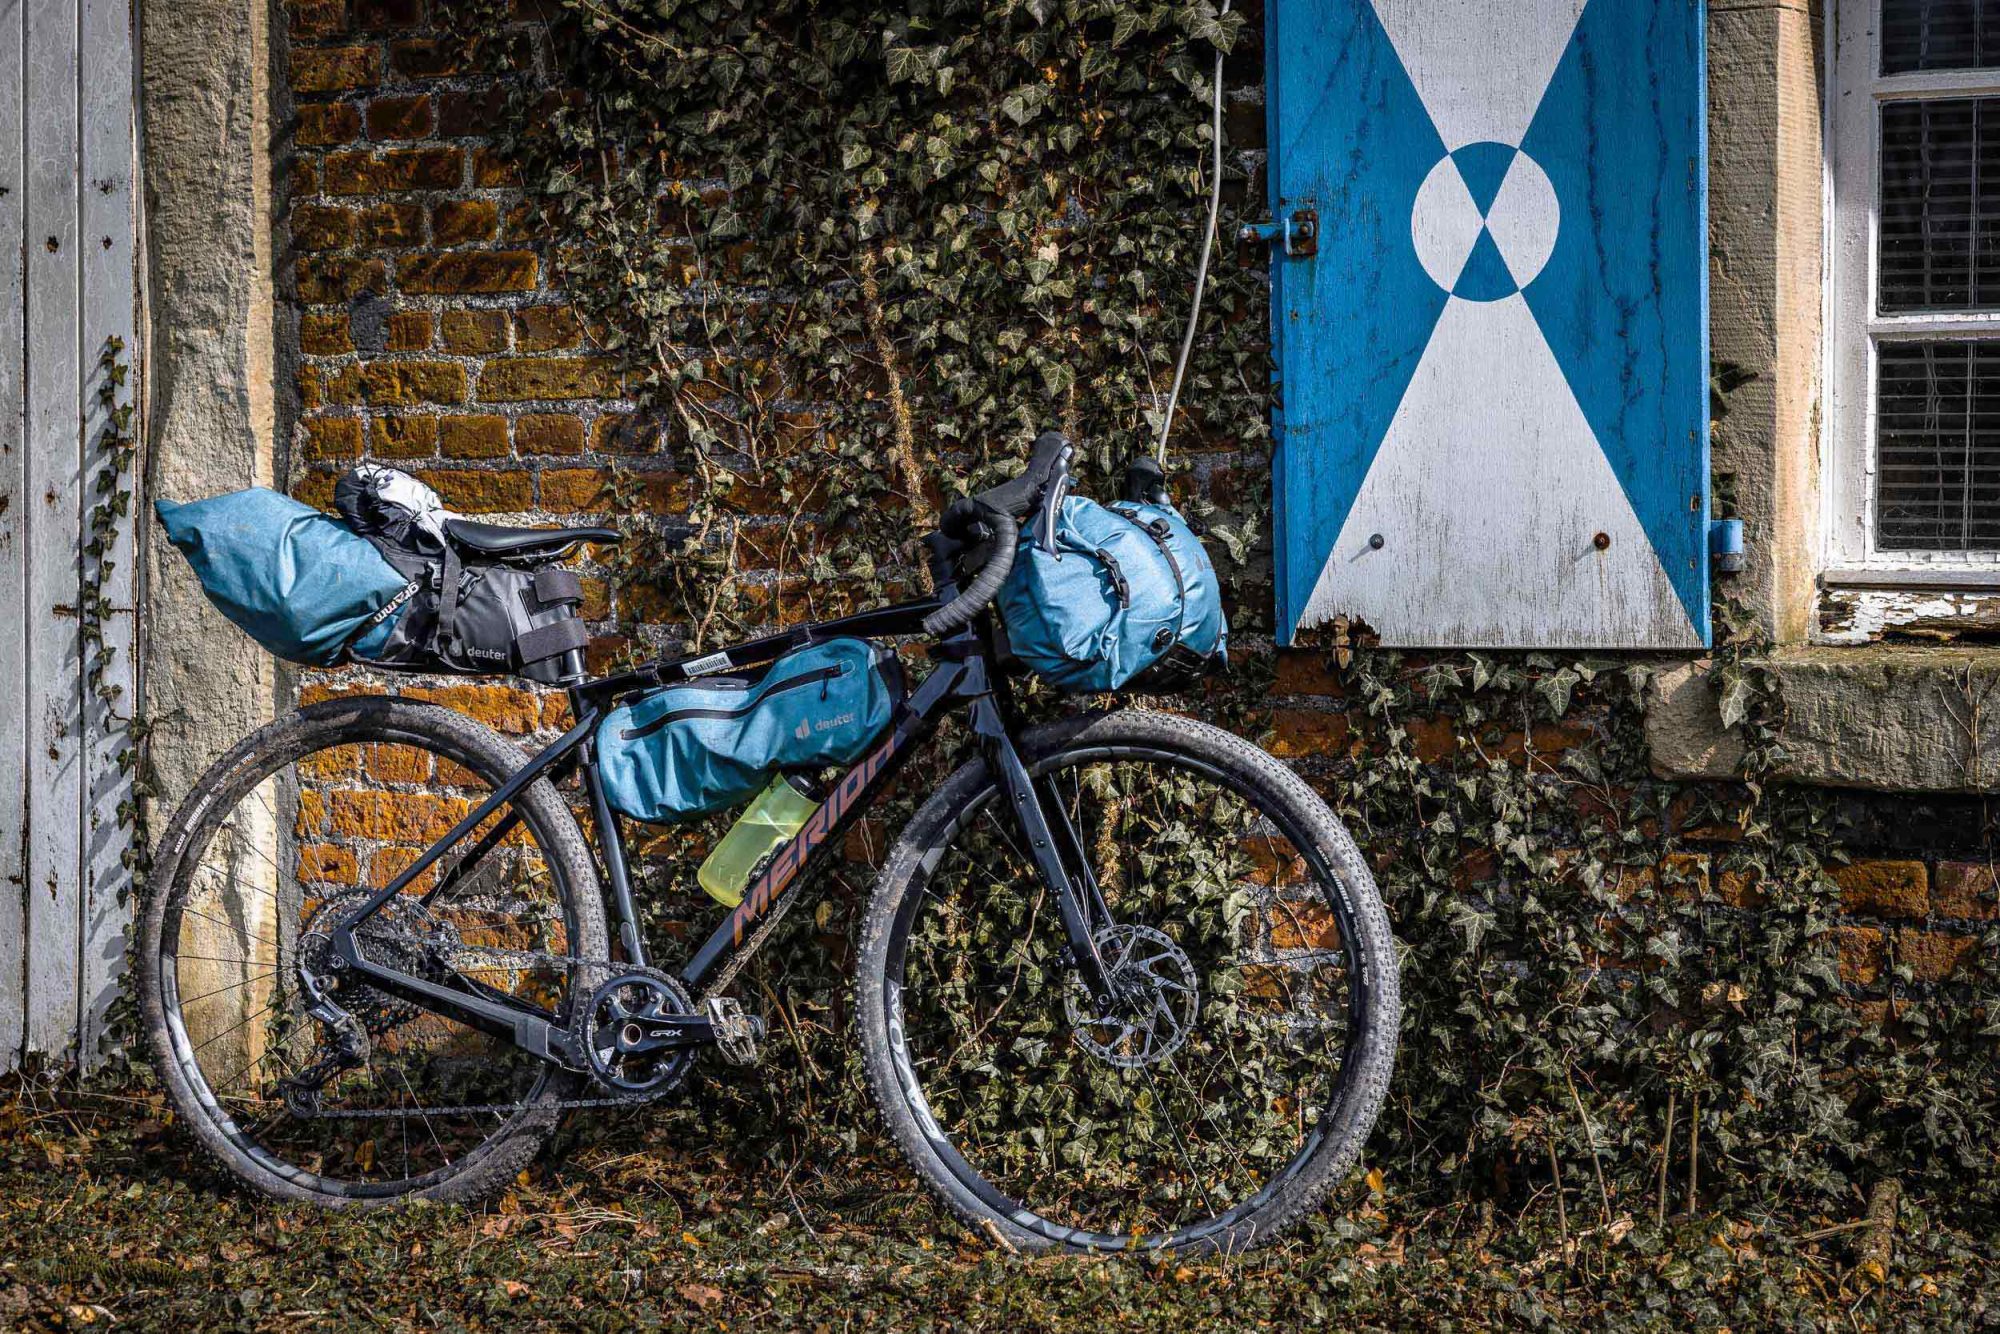 Martin's bikepacking set-up for our merida silex 2024 review: classic with handlebar rollers, saddle bag and frame bag. Despite the rather compact m-frame, it fitted well overall.